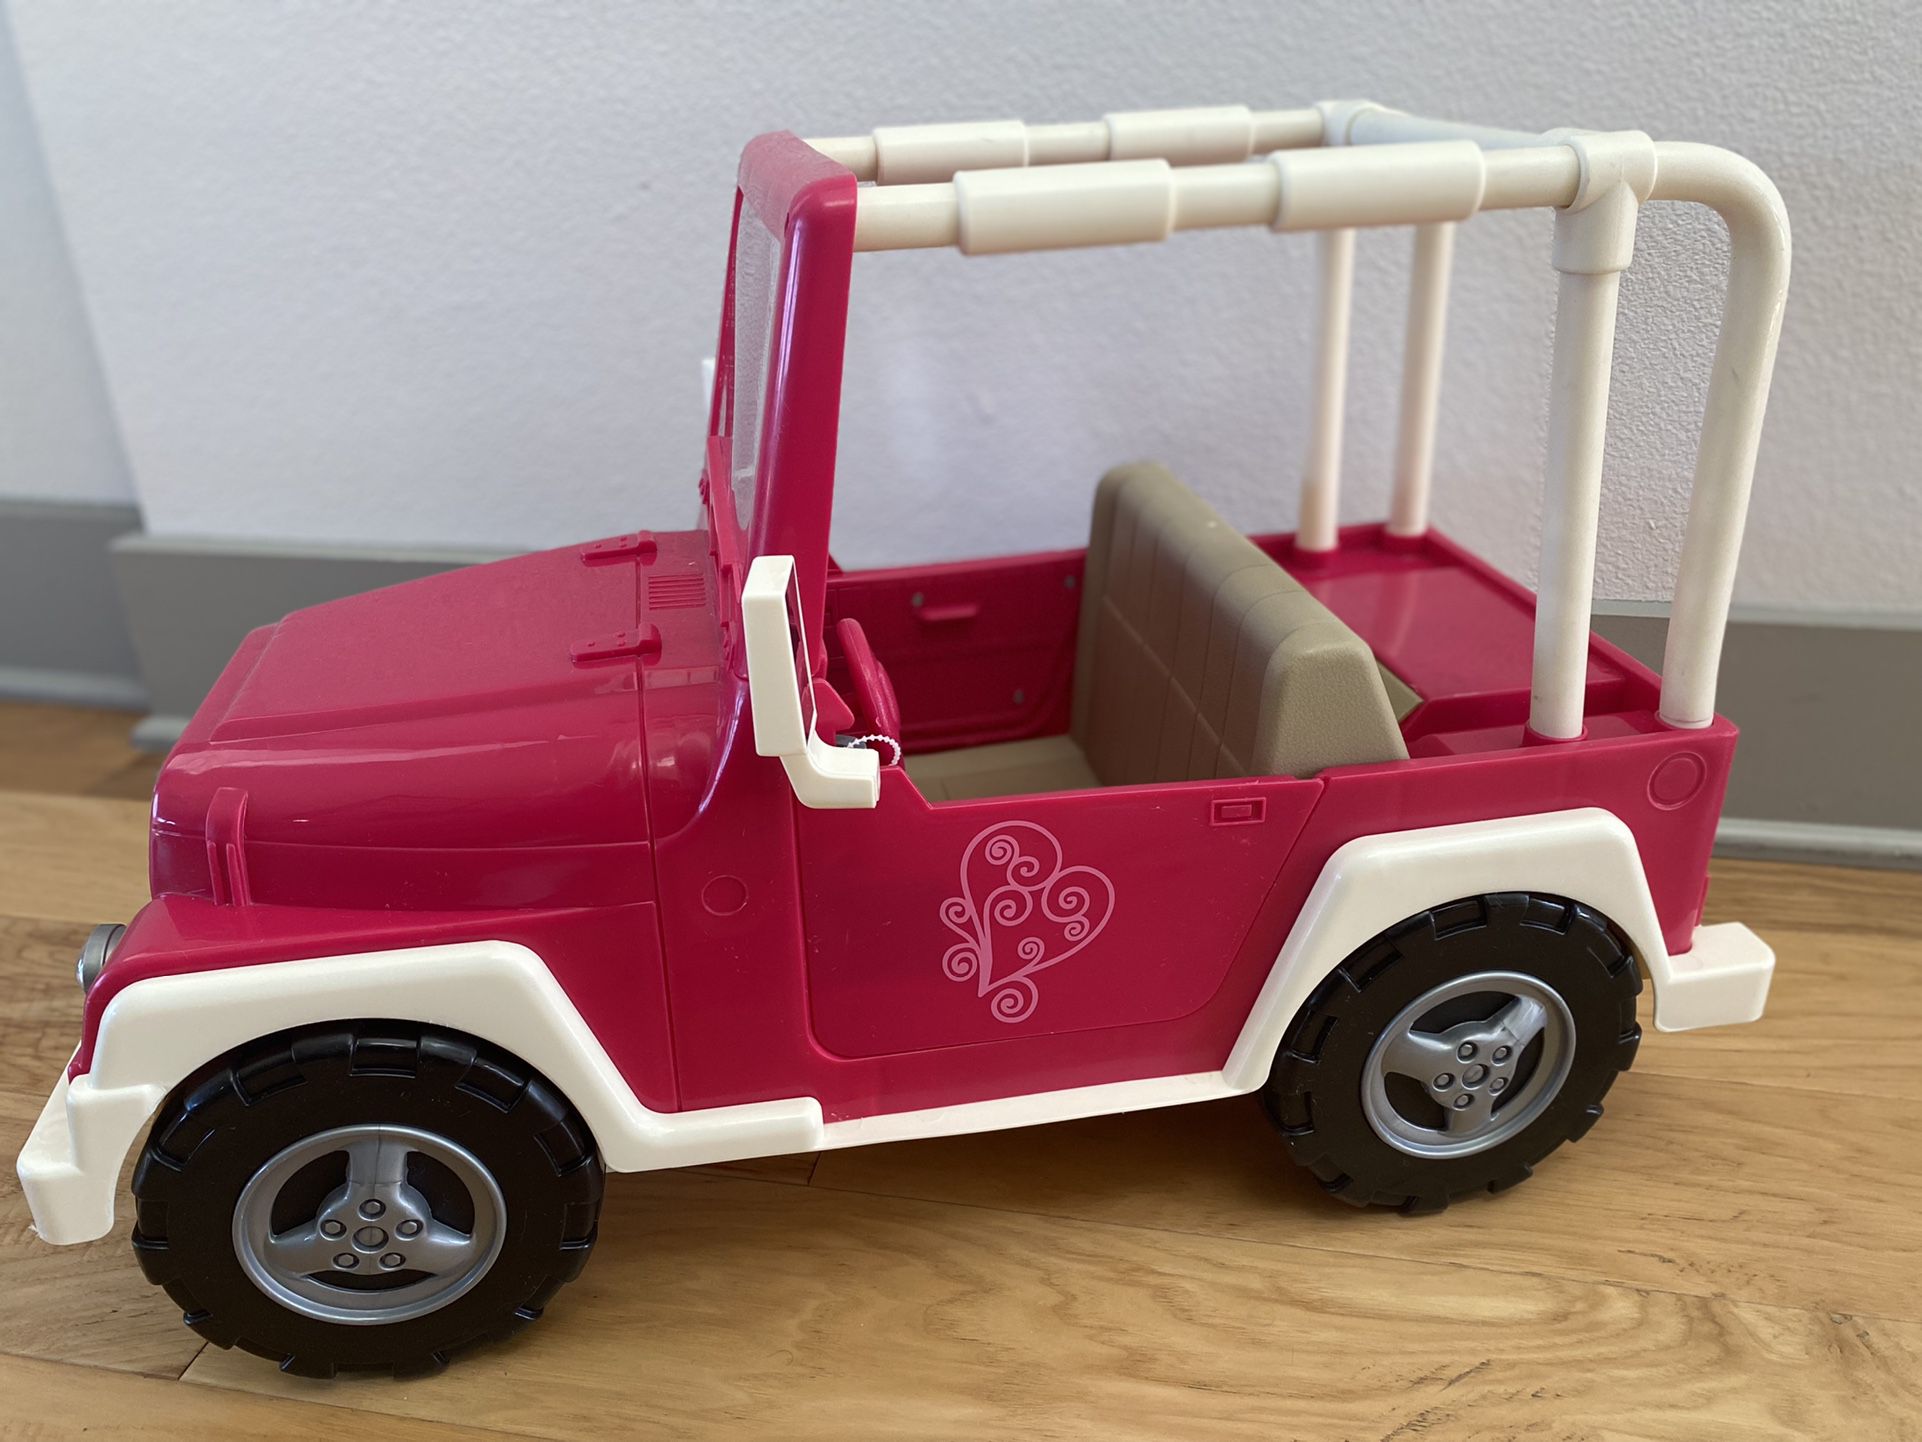 Our Generation Doll Jeep Pink and White for Sale in Cedar TX - OfferUp